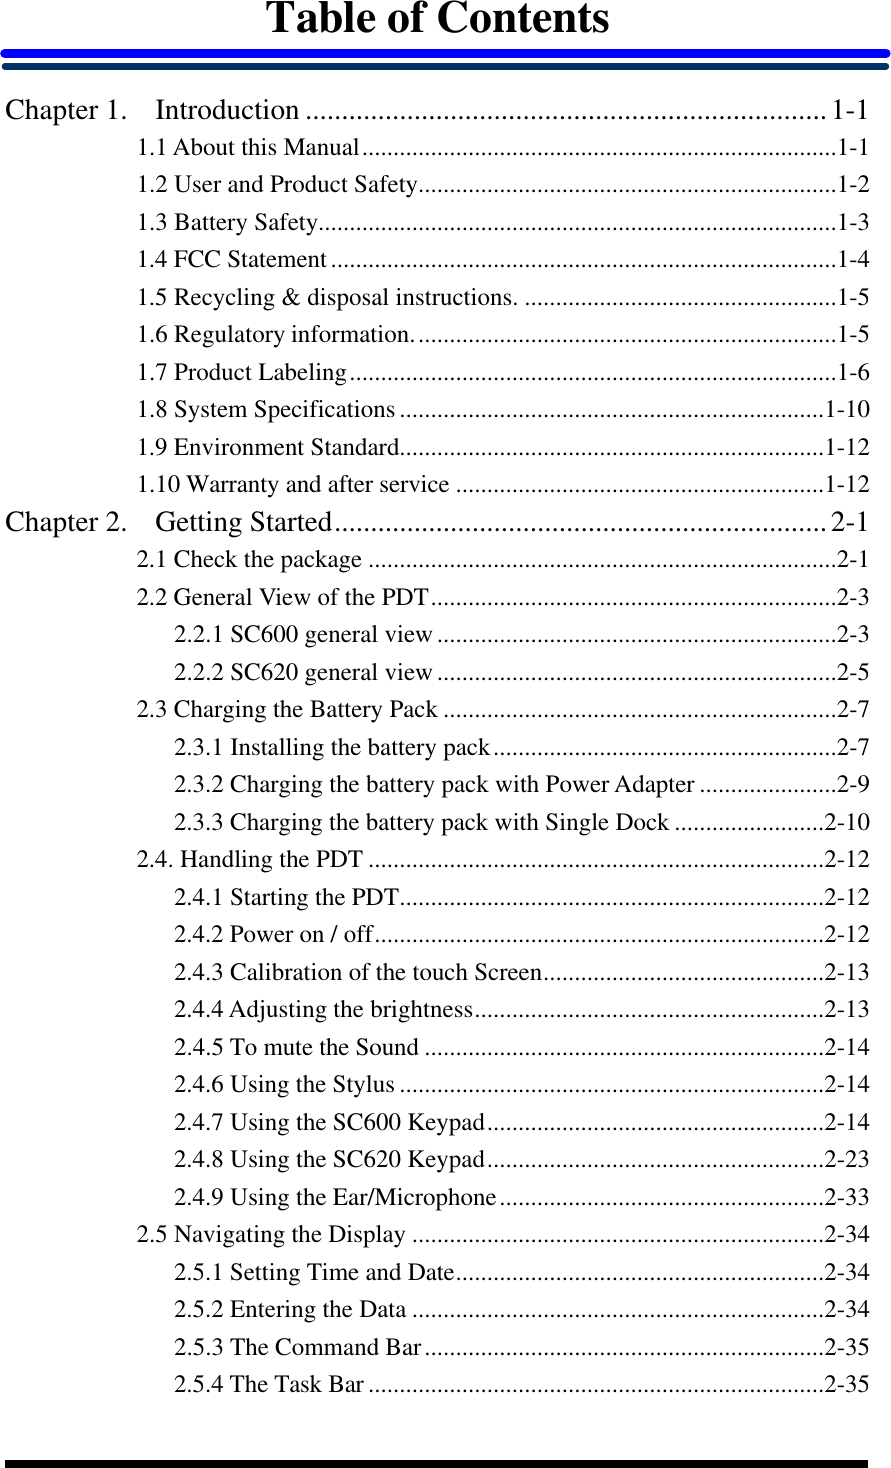  Table of Contents  Chapter 1. Introduction ........................................................................1-1 1.1 About this Manual............................................................................1-1 1.2 User and Product Safety...................................................................1-2 1.3 Battery Safety...................................................................................1-3 1.4 FCC Statement.................................................................................1-4 1.5 Recycling &amp; disposal instructions. ..................................................1-5 1.6 Regulatory information....................................................................1-5 1.7 Product Labeling..............................................................................1-6 1.8 System Specifications....................................................................1-10 1.9 Environment Standard....................................................................1-12 1.10 Warranty and after service ...........................................................1-12 Chapter 2. Getting Started....................................................................2-1 2.1 Check the package ...........................................................................2-1 2.2 General View of the PDT.................................................................2-3 2.2.1 SC600 general view................................................................2-3 2.2.2 SC620 general view................................................................2-5 2.3 Charging the Battery Pack ...............................................................2-7 2.3.1 Installing the battery pack.......................................................2-7 2.3.2 Charging the battery pack with Power Adapter ......................2-9 2.3.3 Charging the battery pack with Single Dock ........................2-10 2.4. Handling the PDT .........................................................................2-12 2.4.1 Starting the PDT....................................................................2-12 2.4.2 Power on / off........................................................................2-12 2.4.3 Calibration of the touch Screen.............................................2-13 2.4.4 Adjusting the brightness........................................................2-13 2.4.5 To mute the Sound ................................................................2-14 2.4.6 Using the Stylus ....................................................................2-14 2.4.7 Using the SC600 Keypad......................................................2-14 2.4.8 Using the SC620 Keypad......................................................2-23 2.4.9 Using the Ear/Microphone....................................................2-33 2.5 Navigating the Display ..................................................................2-34 2.5.1 Setting Time and Date...........................................................2-34 2.5.2 Entering the Data ..................................................................2-34 2.5.3 The Command Bar................................................................2-35 2.5.4 The Task Bar .........................................................................2-35 